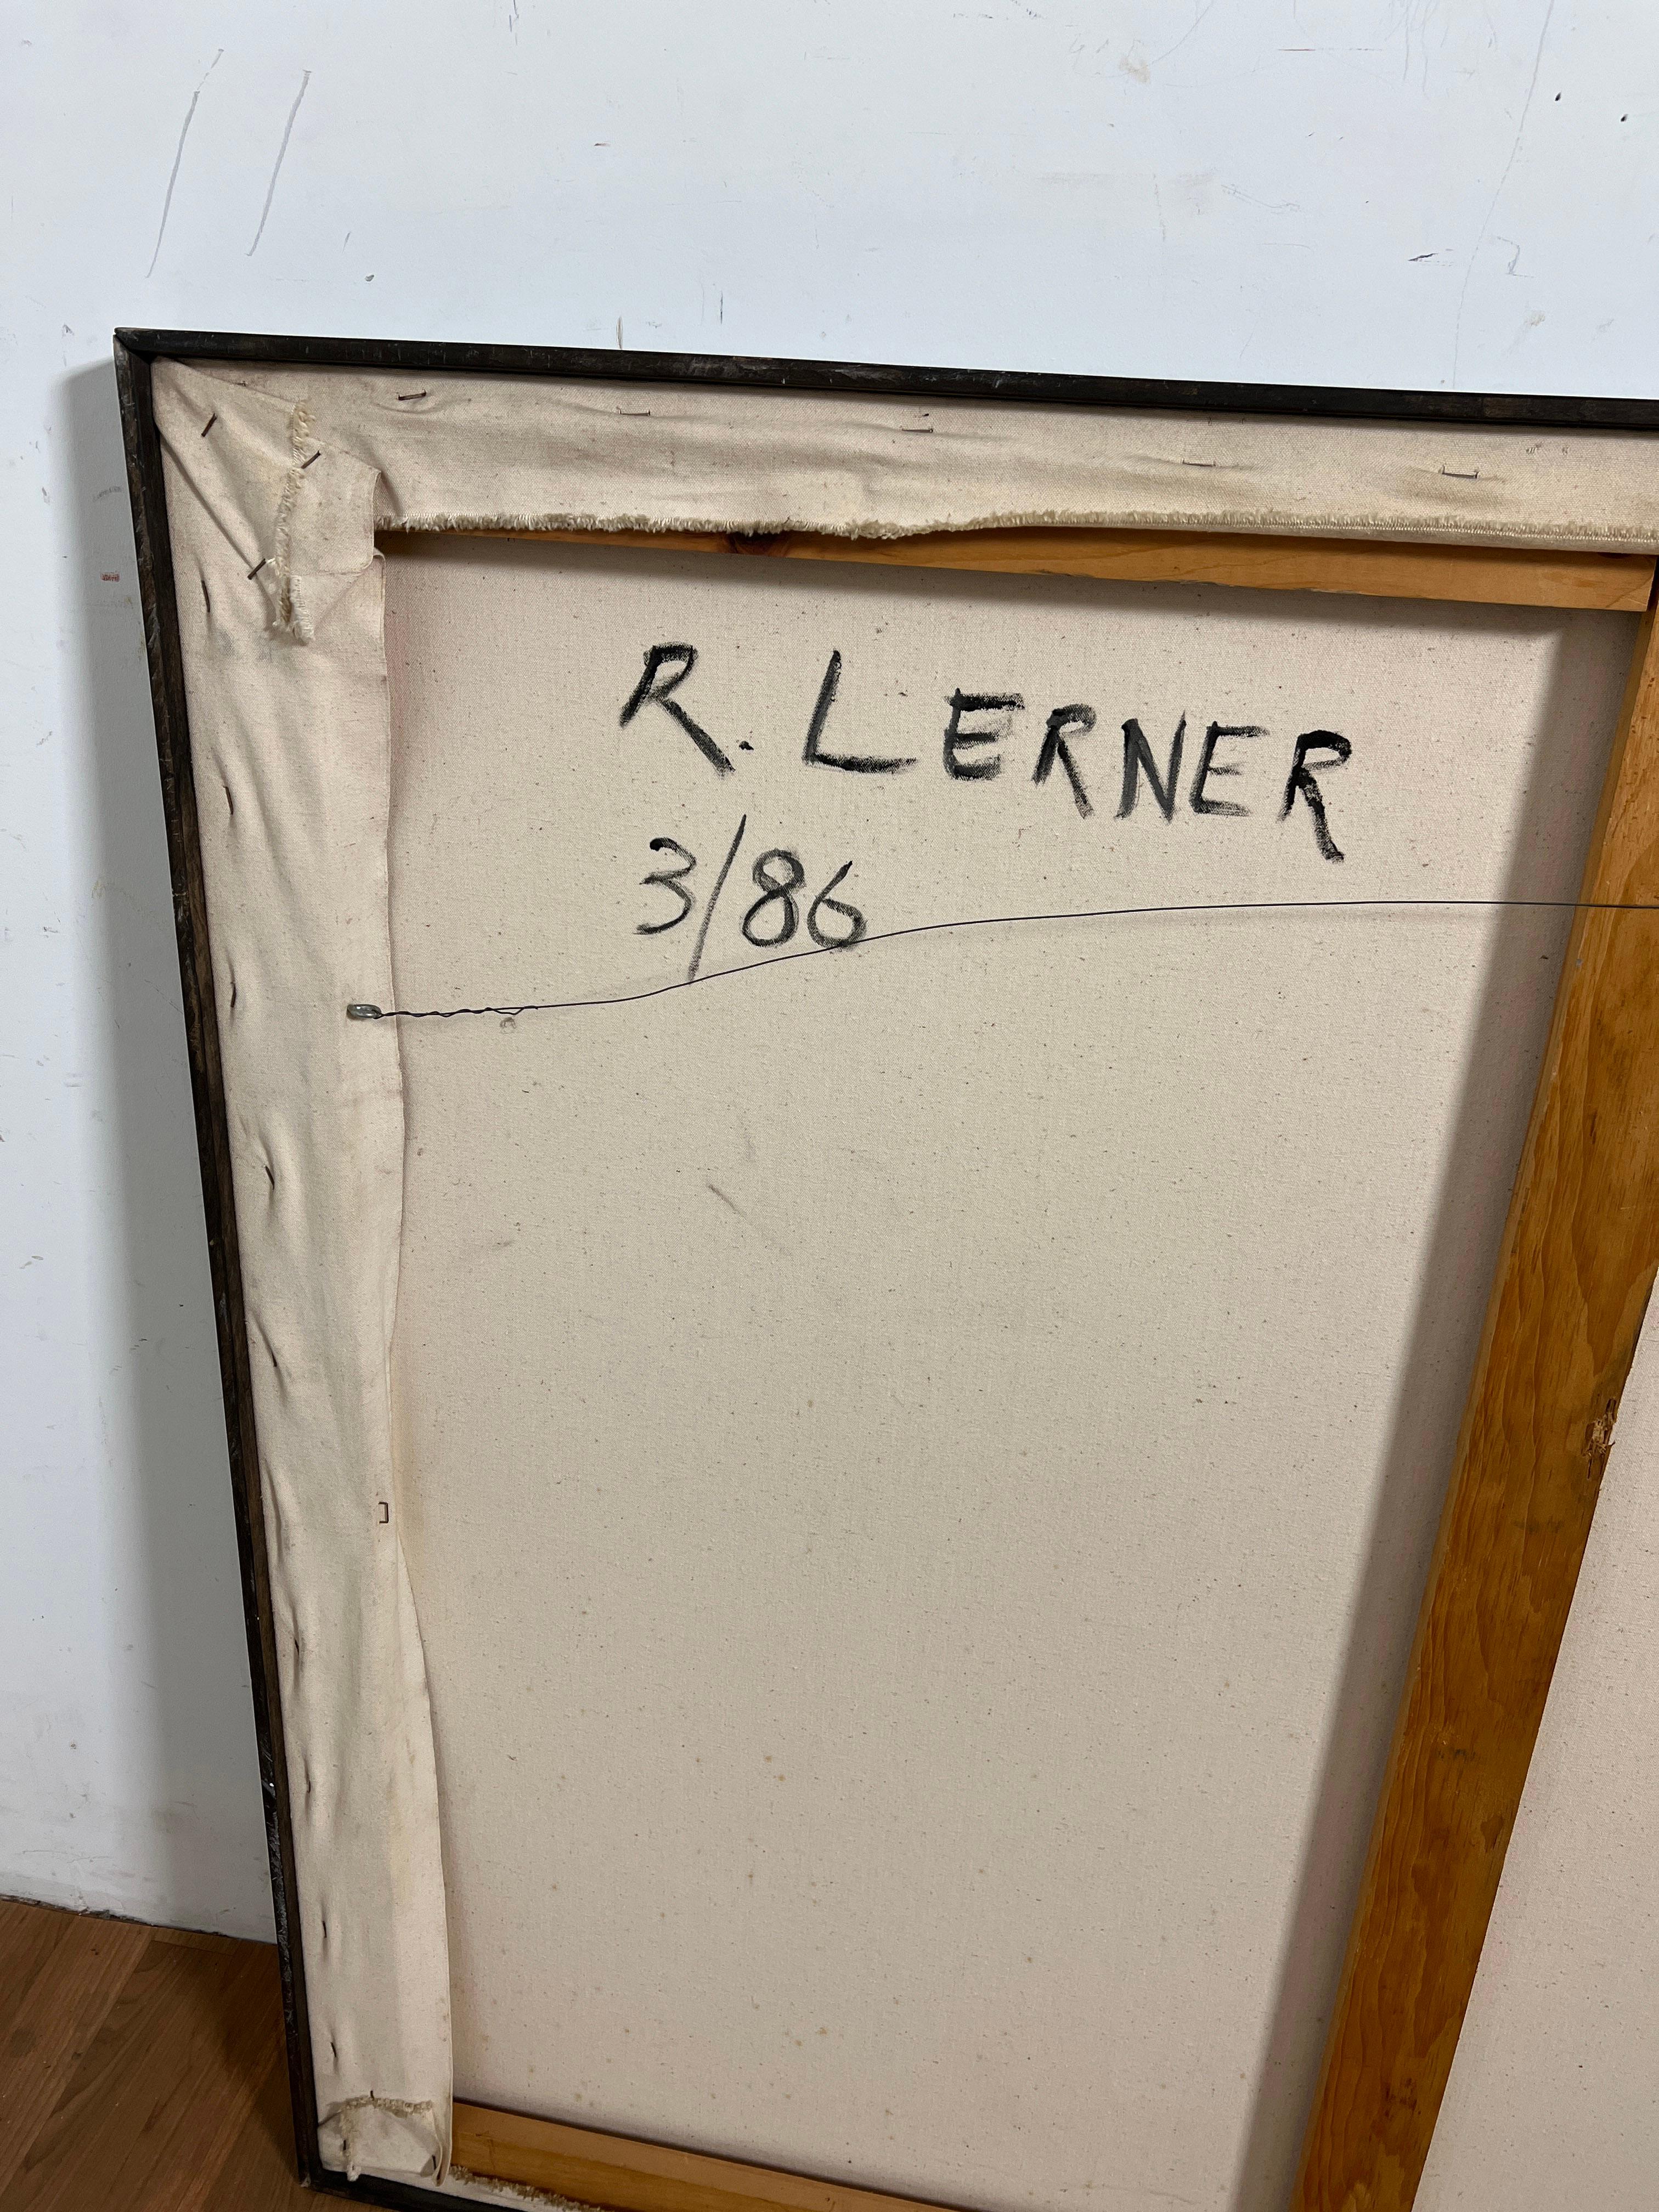 Postmodern Abstract Canvas Signed R. Lerner, Dated 1986 For Sale 3